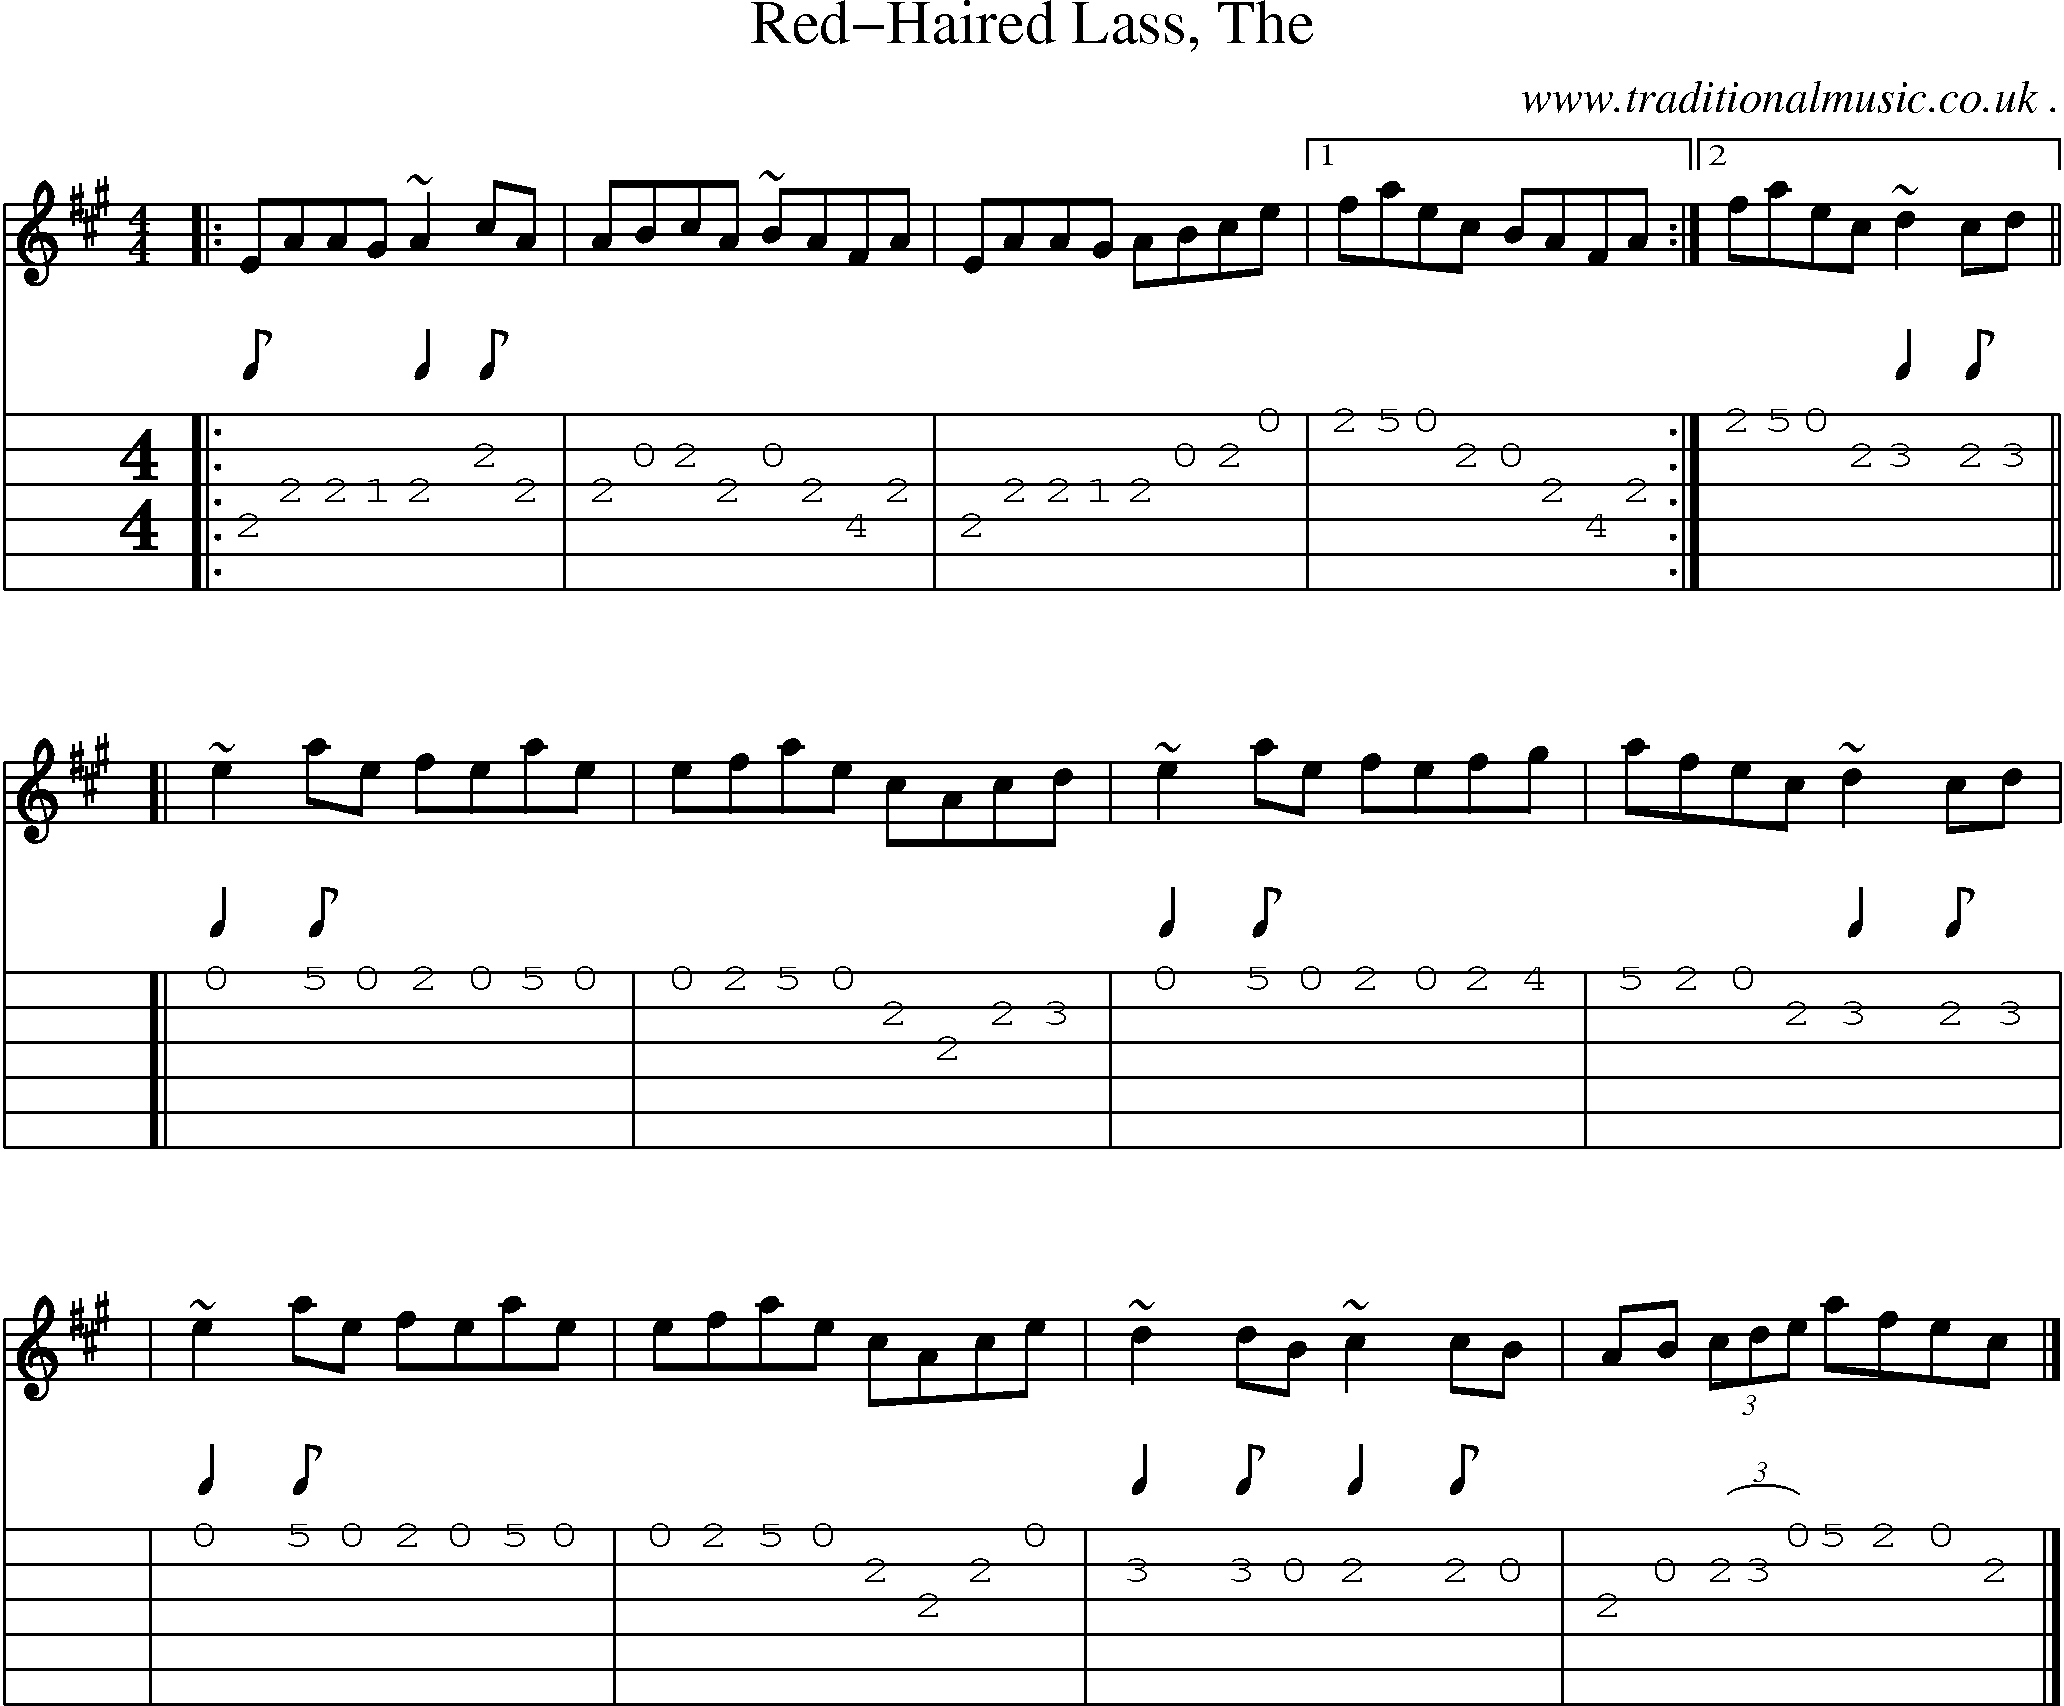 Sheet-music  score, Chords and Guitar Tabs for Red-haired Lass The